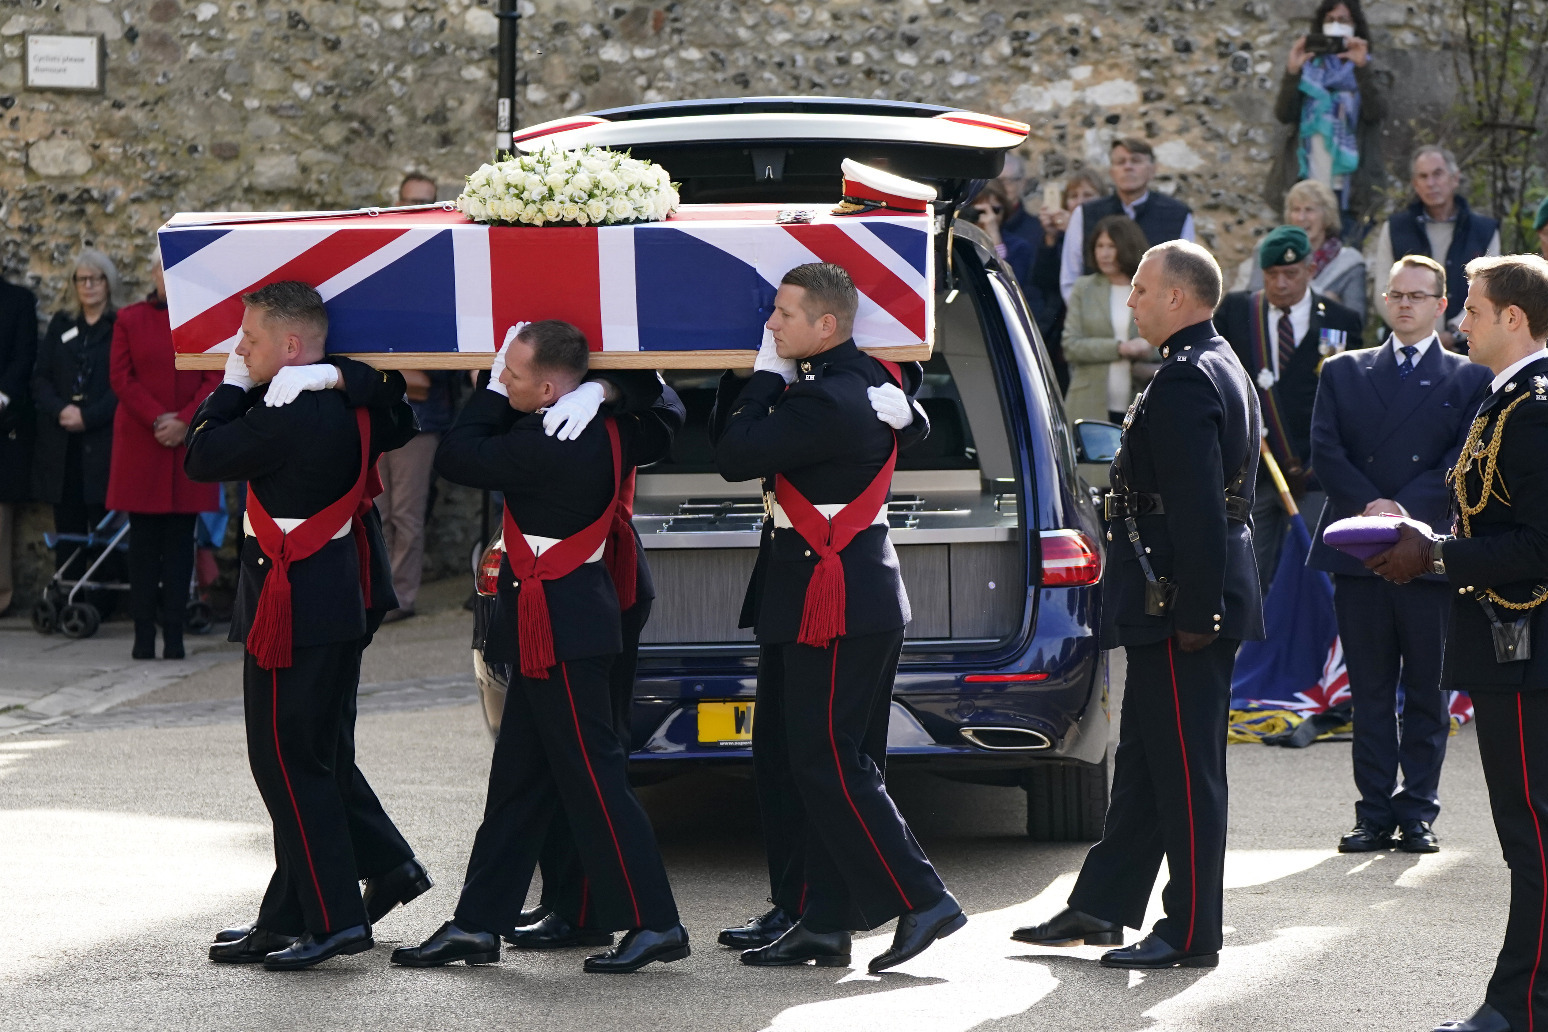 More than 700 mourners attend funeral of former head of the Royal Marines 